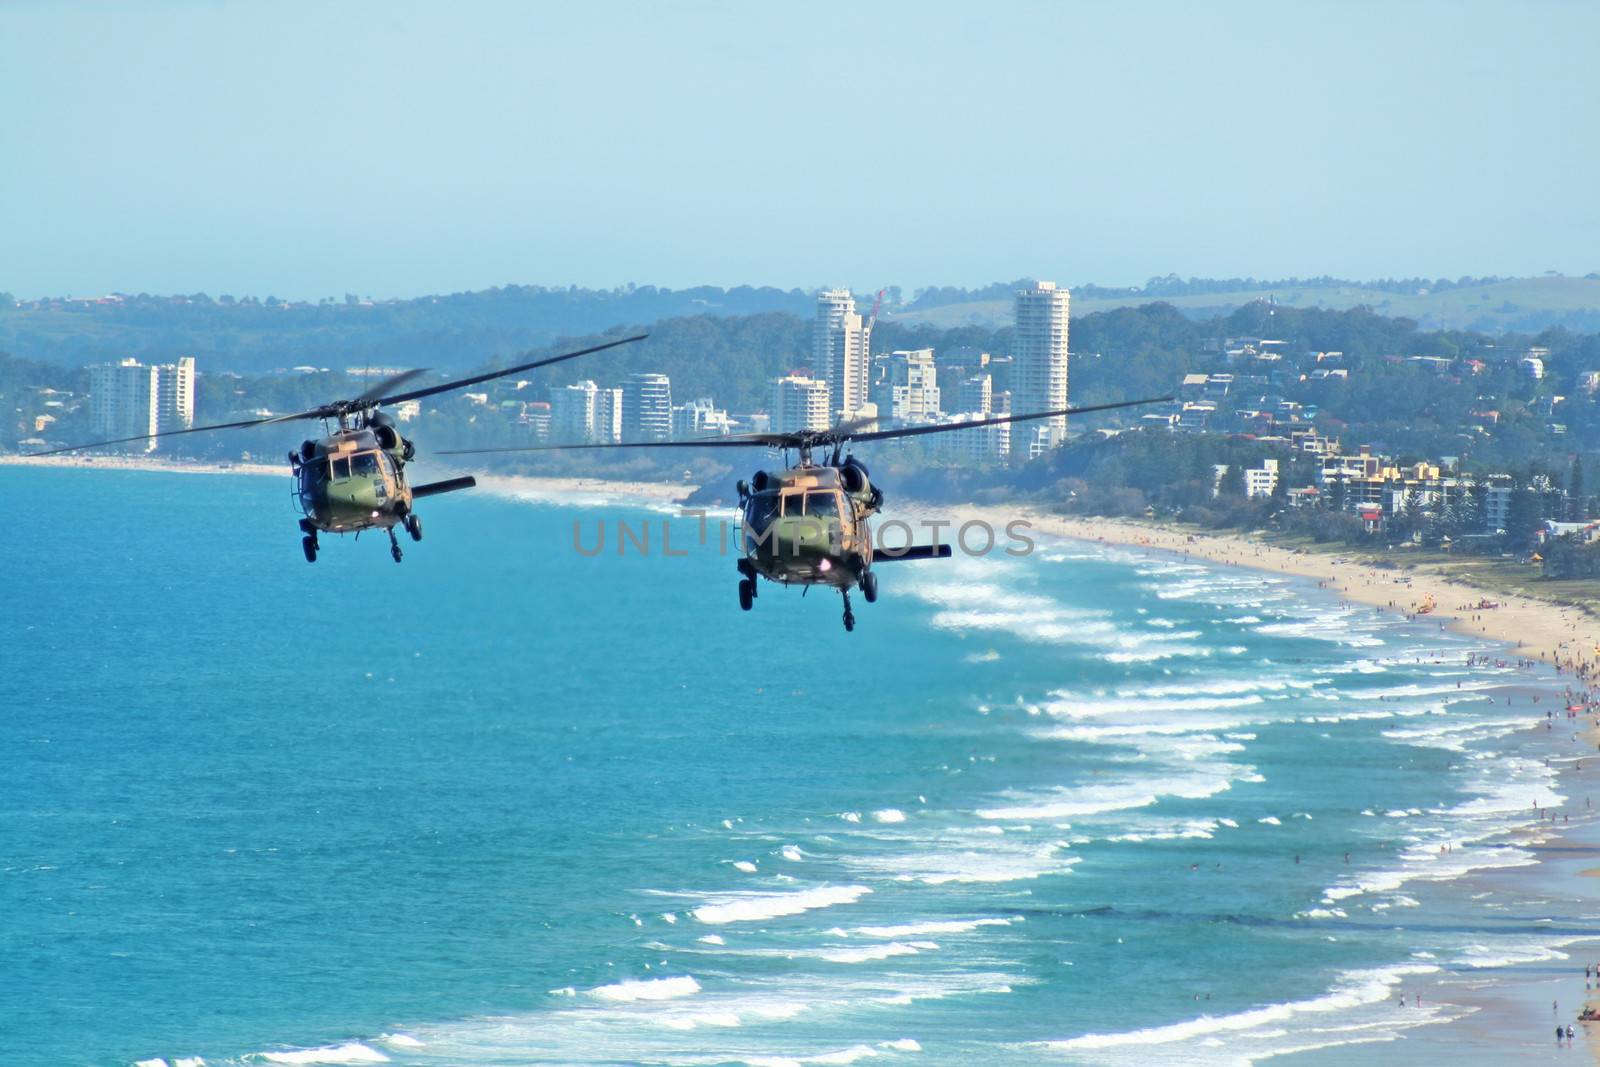 Australian Army Black choppers fly North across Surfers Paradise and Gold Coast beaches Australia.